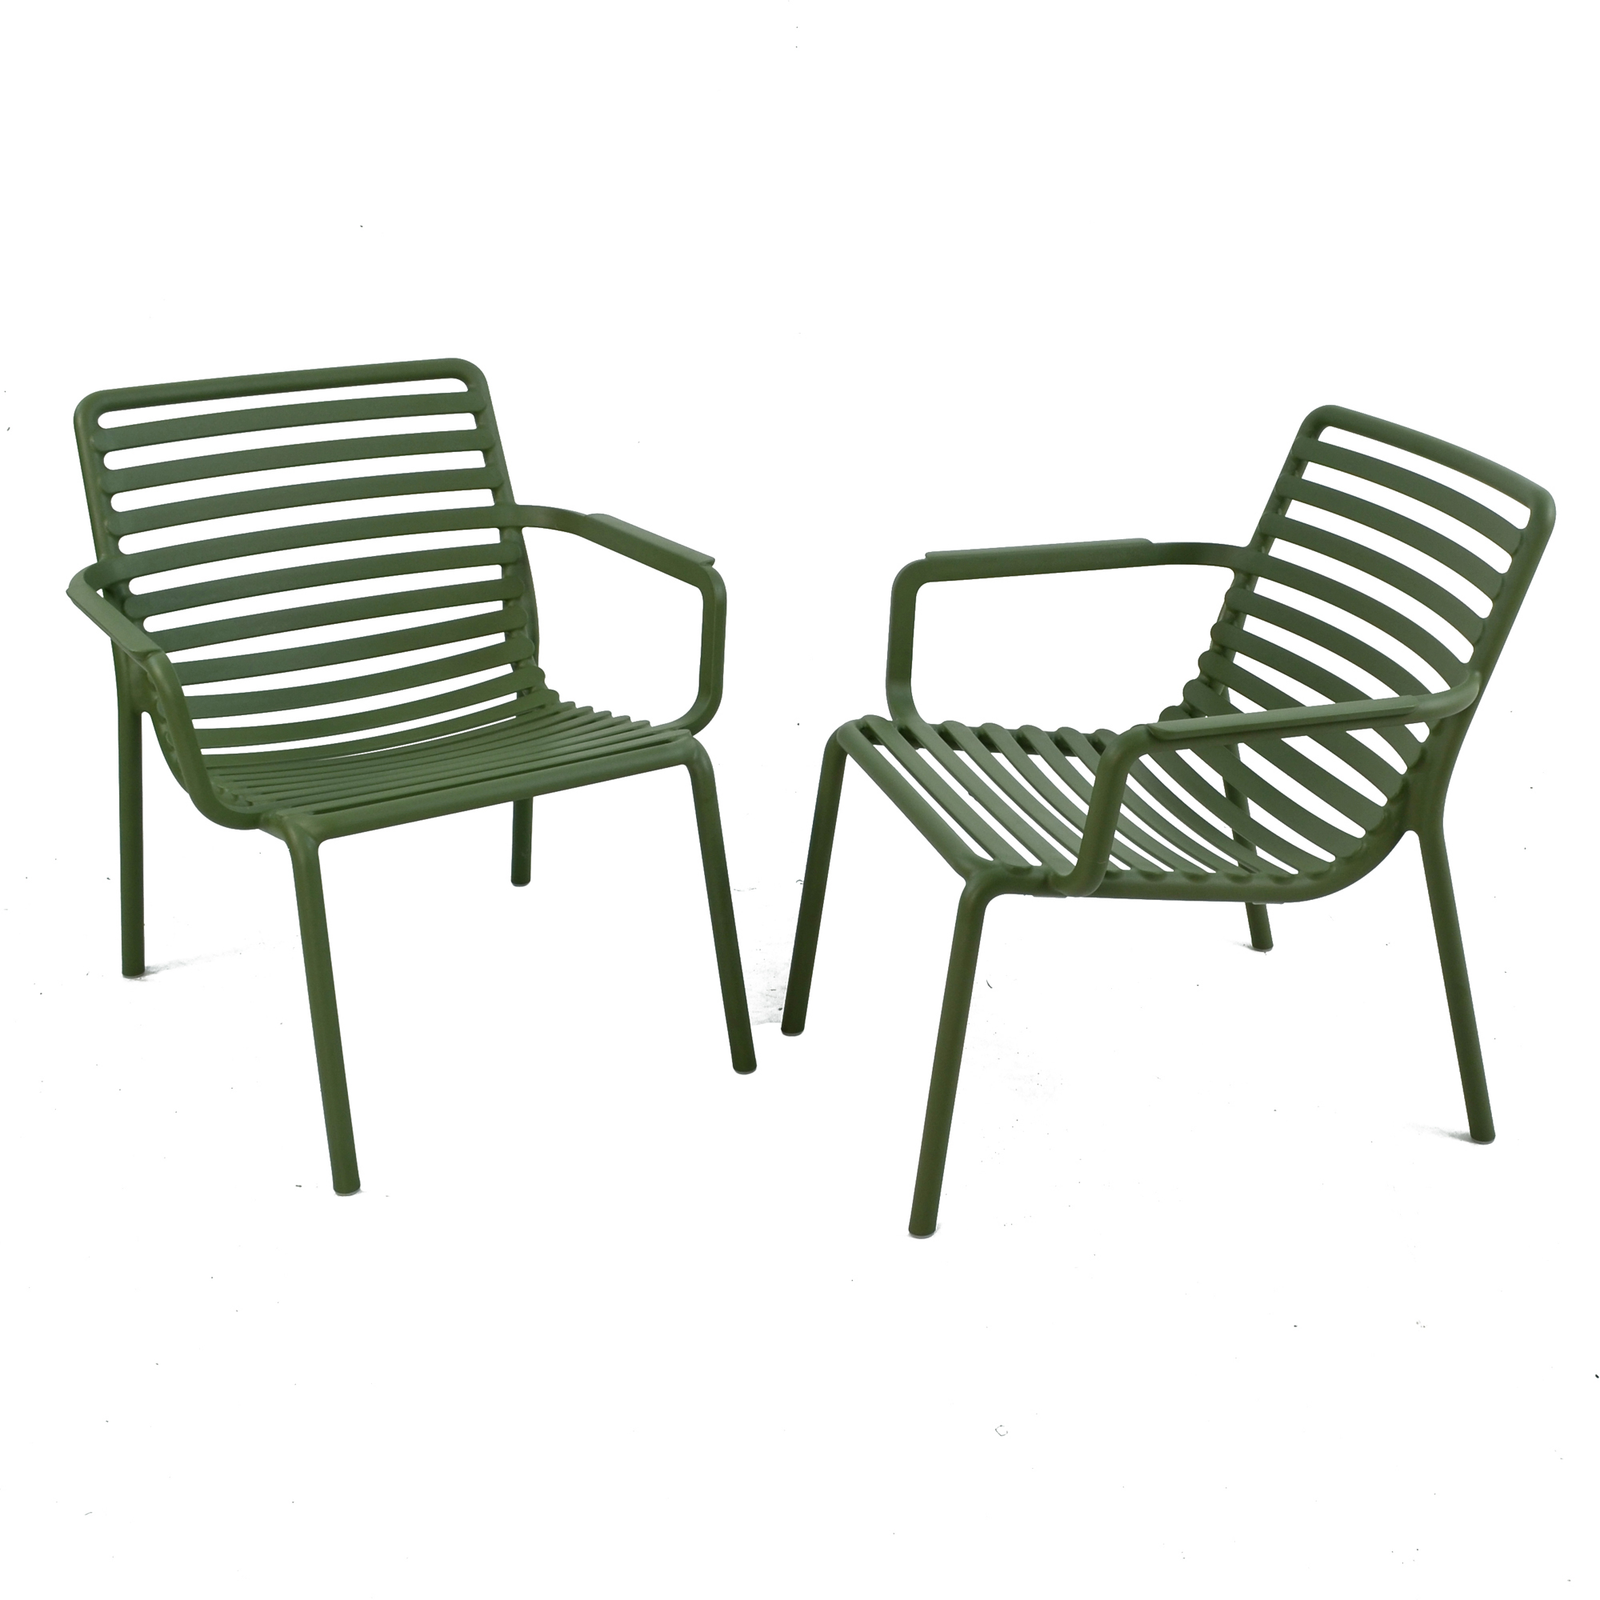 Nardi Doga Relax Garden Chair in Olive Green (Pack of 2) Chairs Nardi   